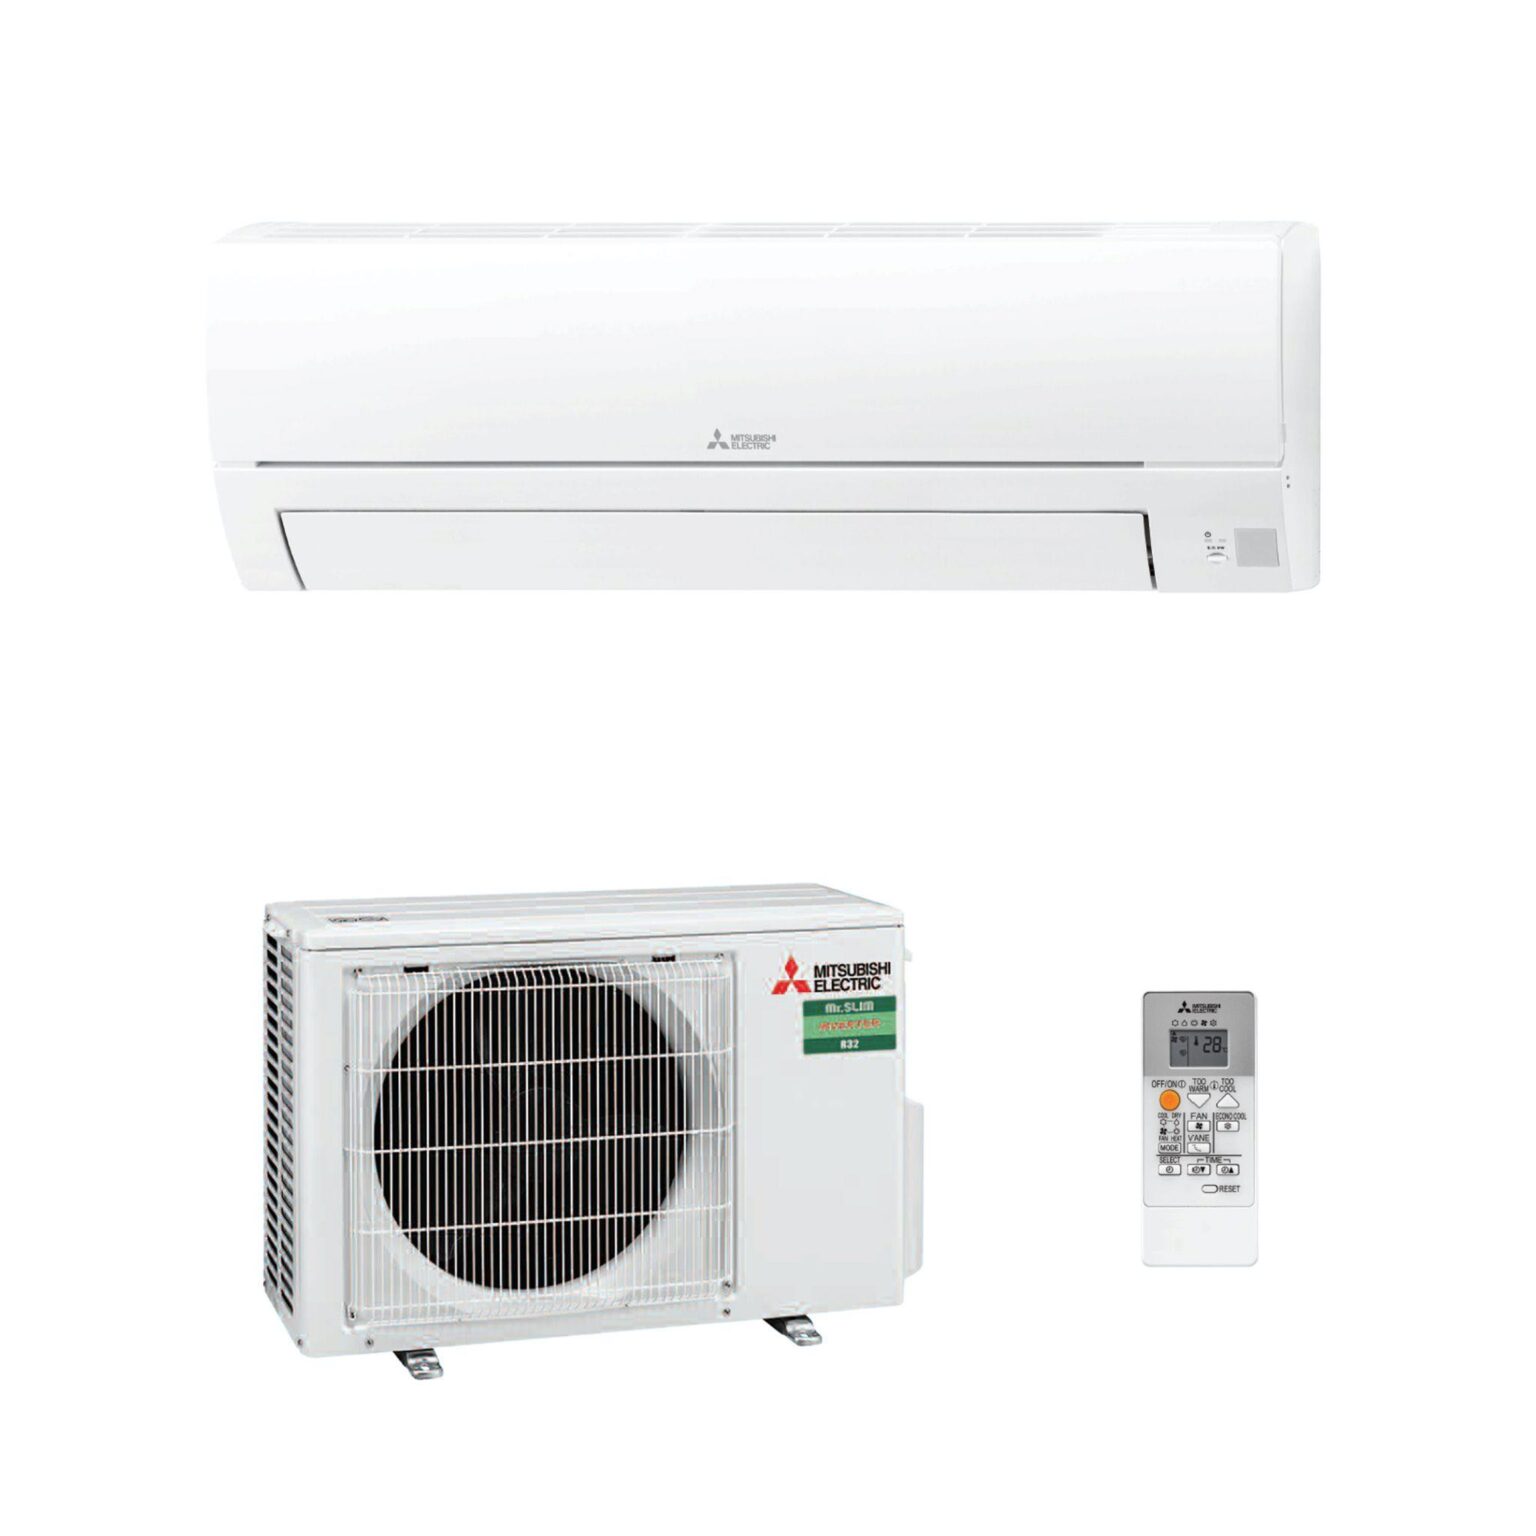 Mitsubishi Electric Msy Tp Vf Wall Mounted Air Conditioning System